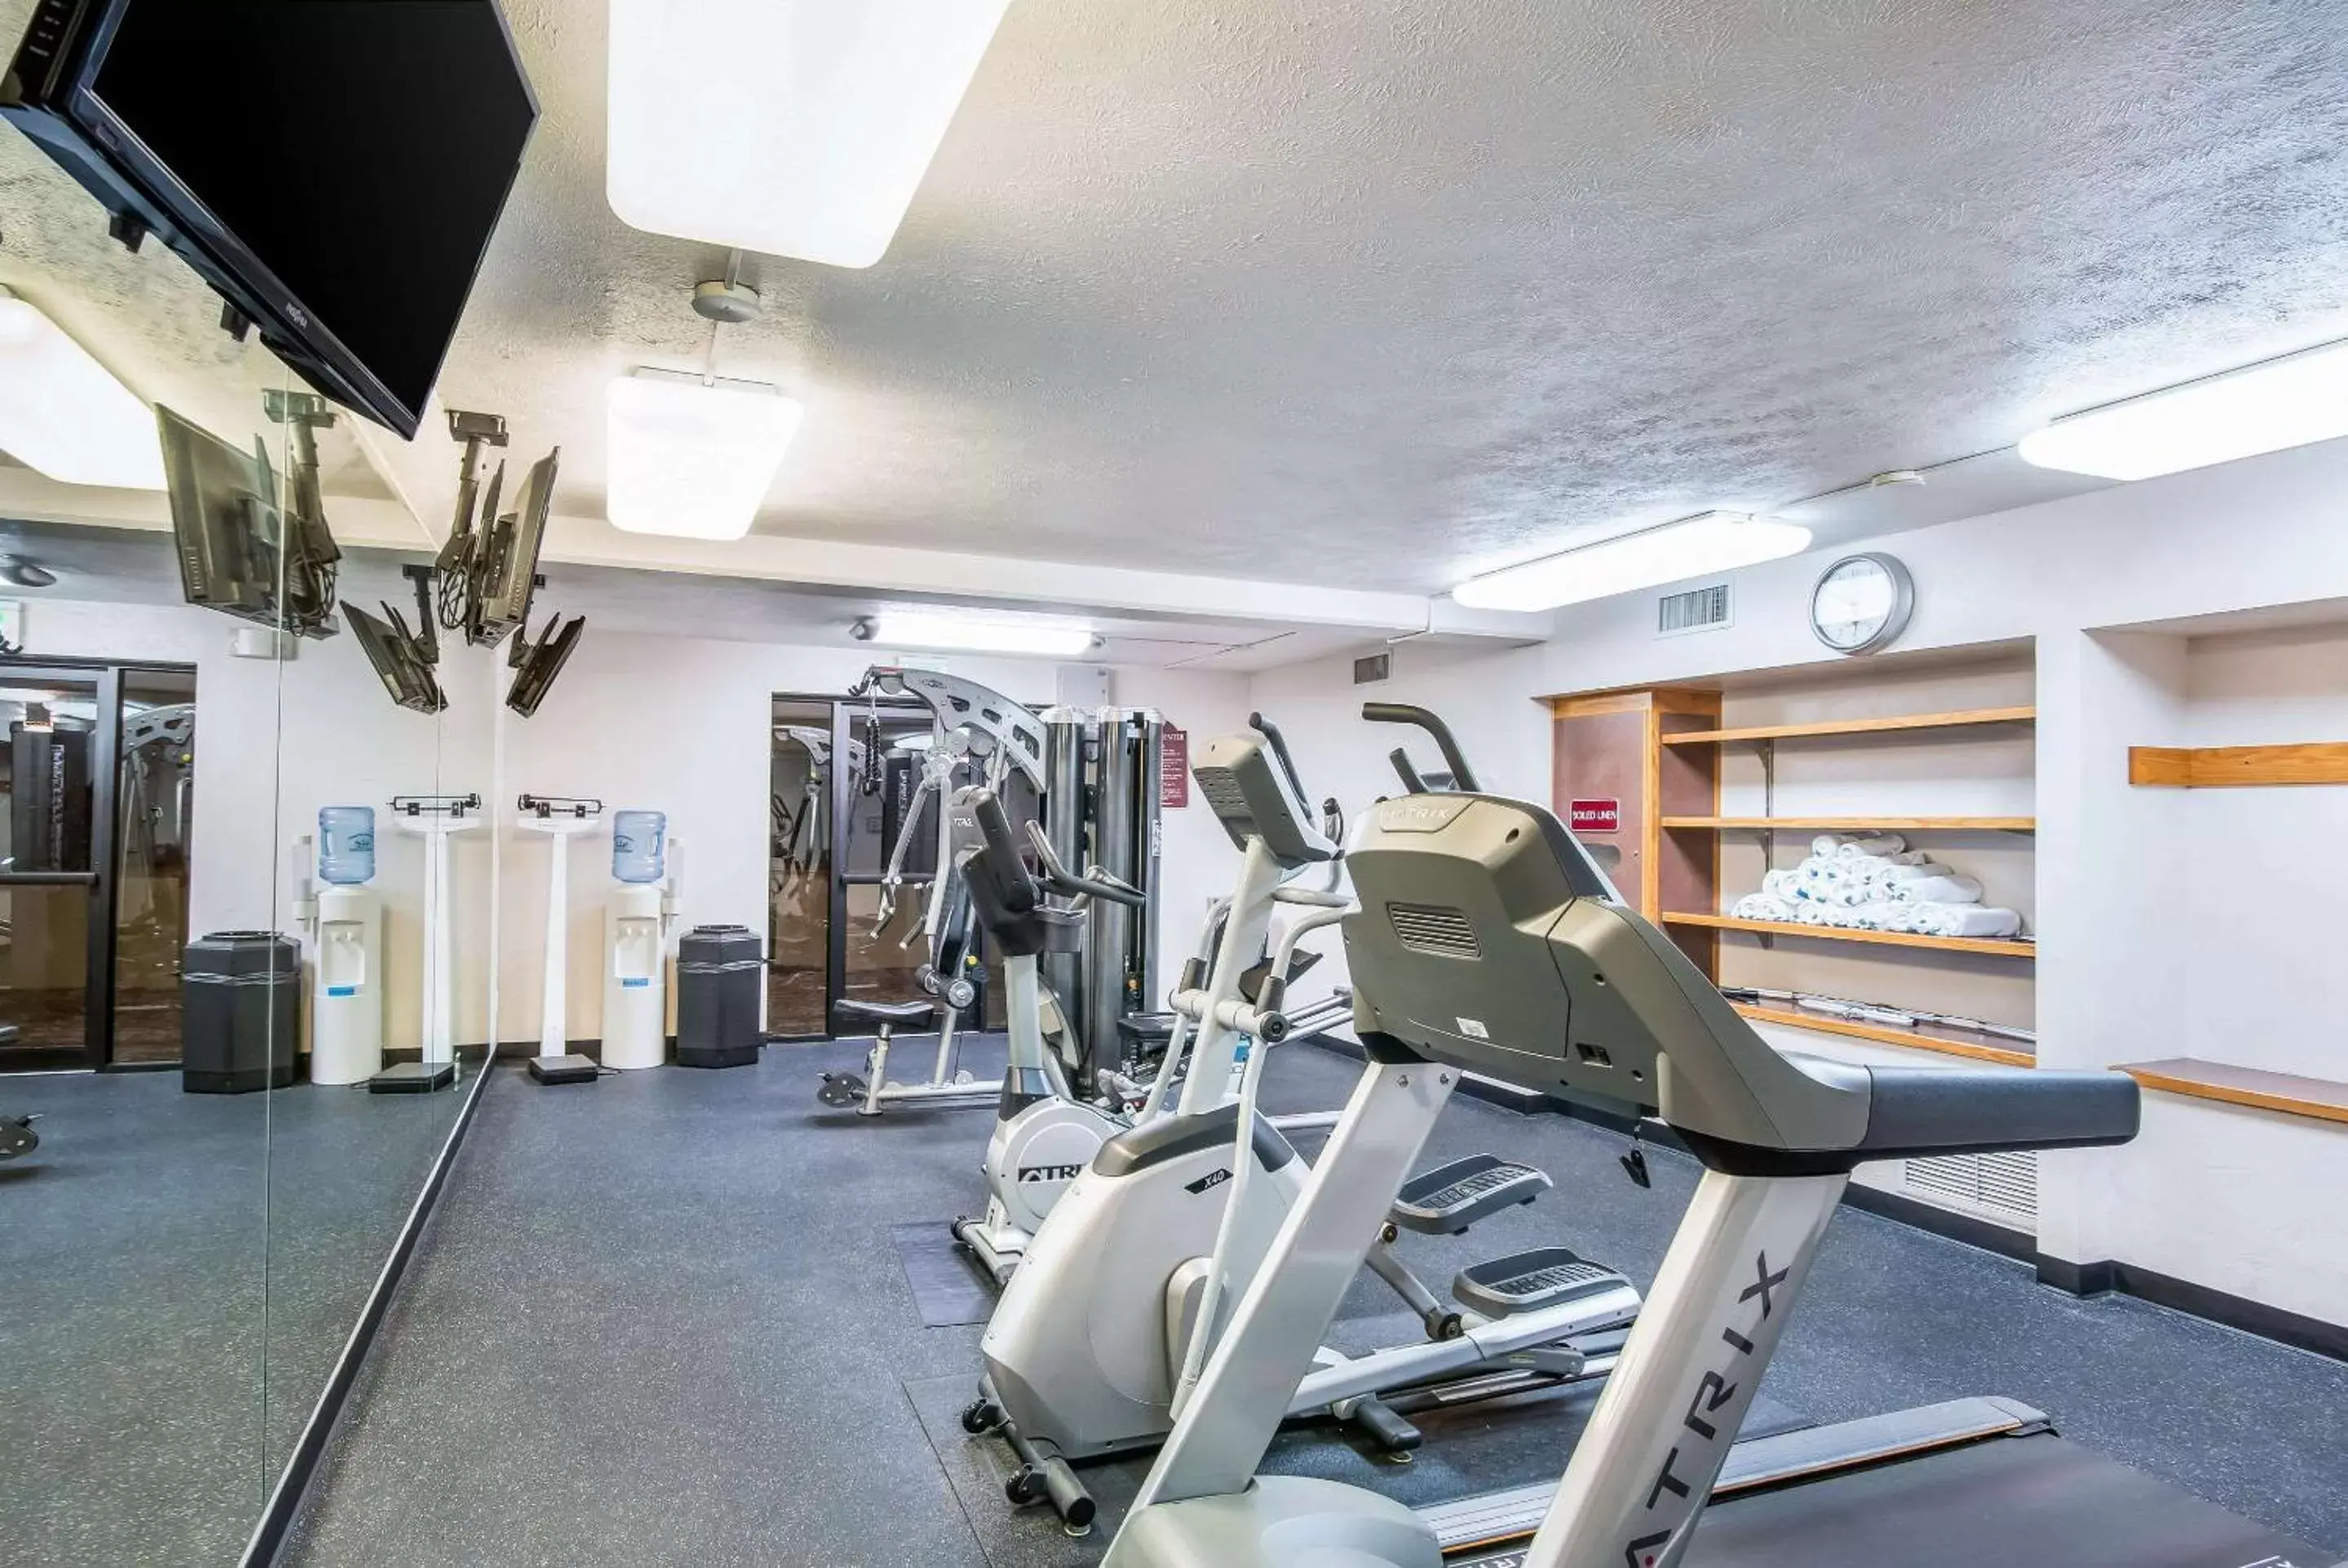 Fitness centre/facilities, Fitness Center/Facilities in Clarion Inn Grand Junction